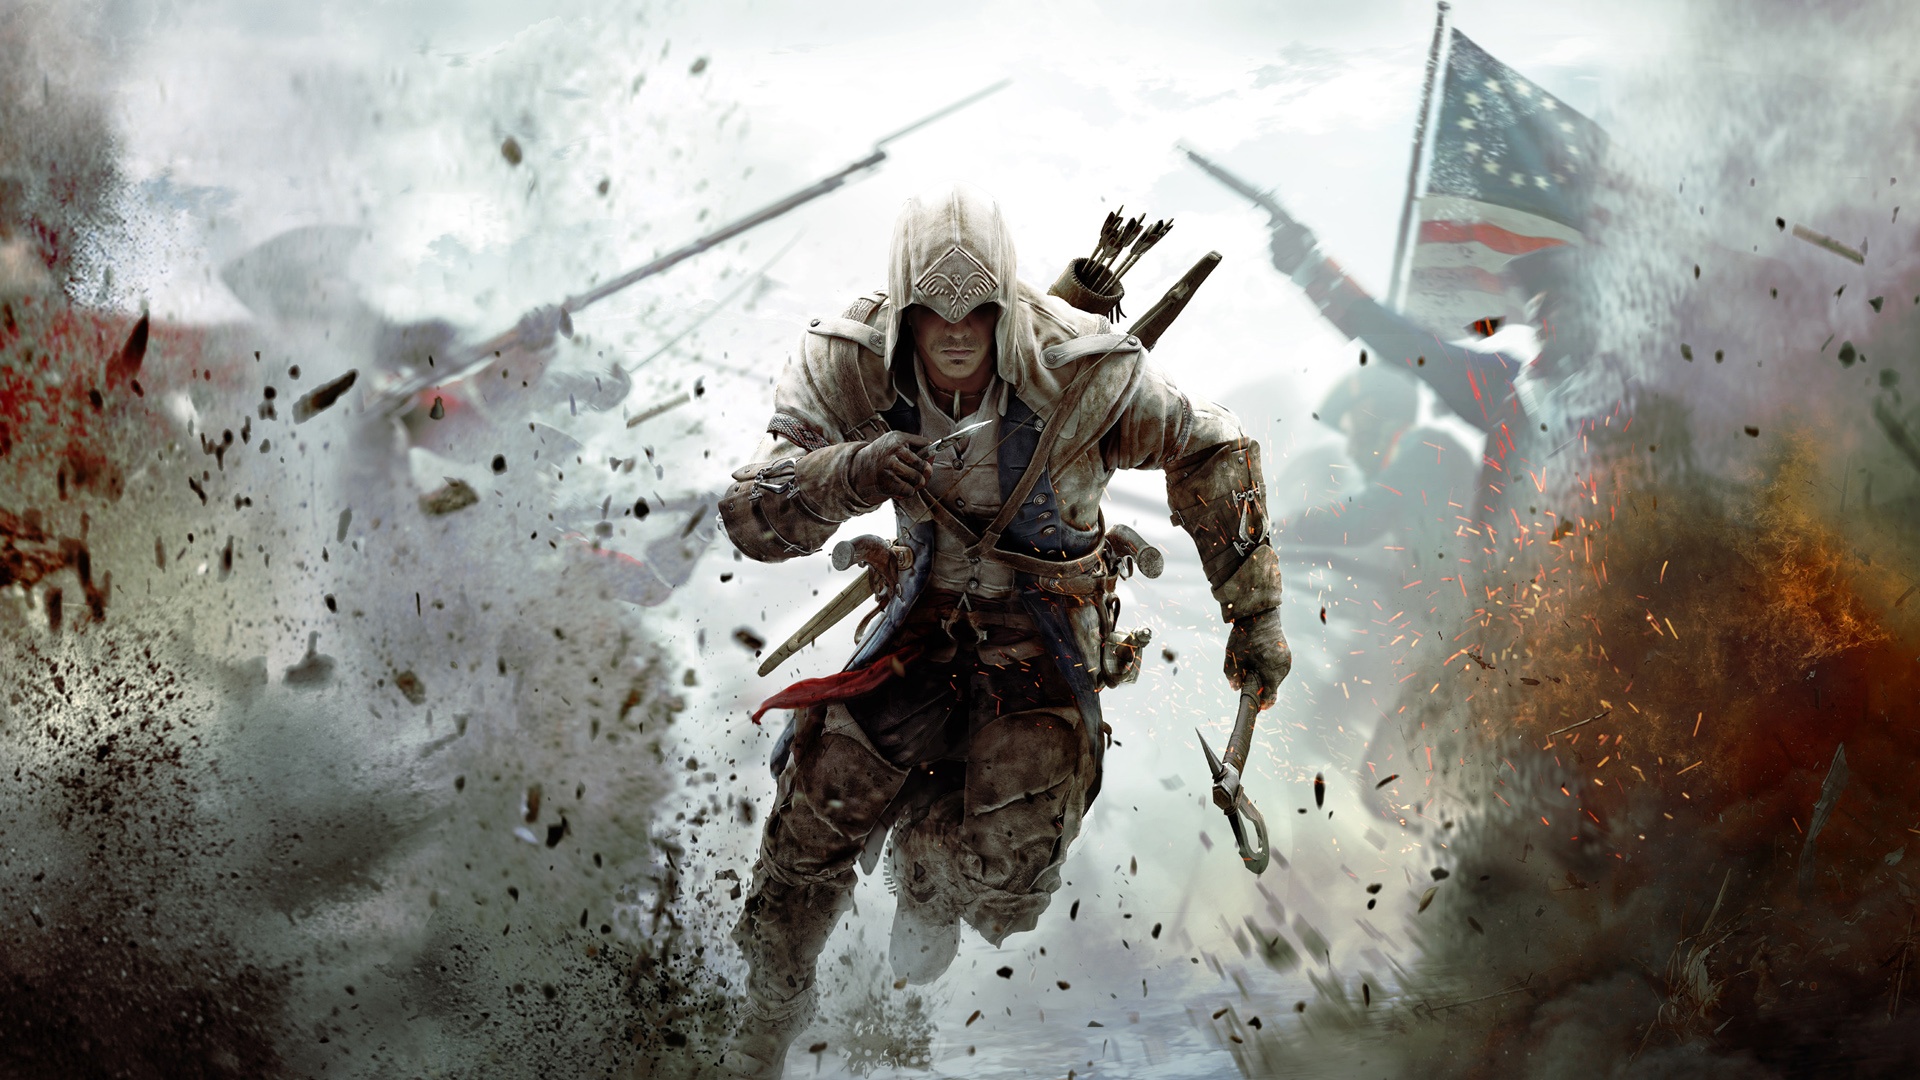 Assassins Creed 3 2012 Game Wallpaper Hd 1080p Pictures Photos 1920x1080